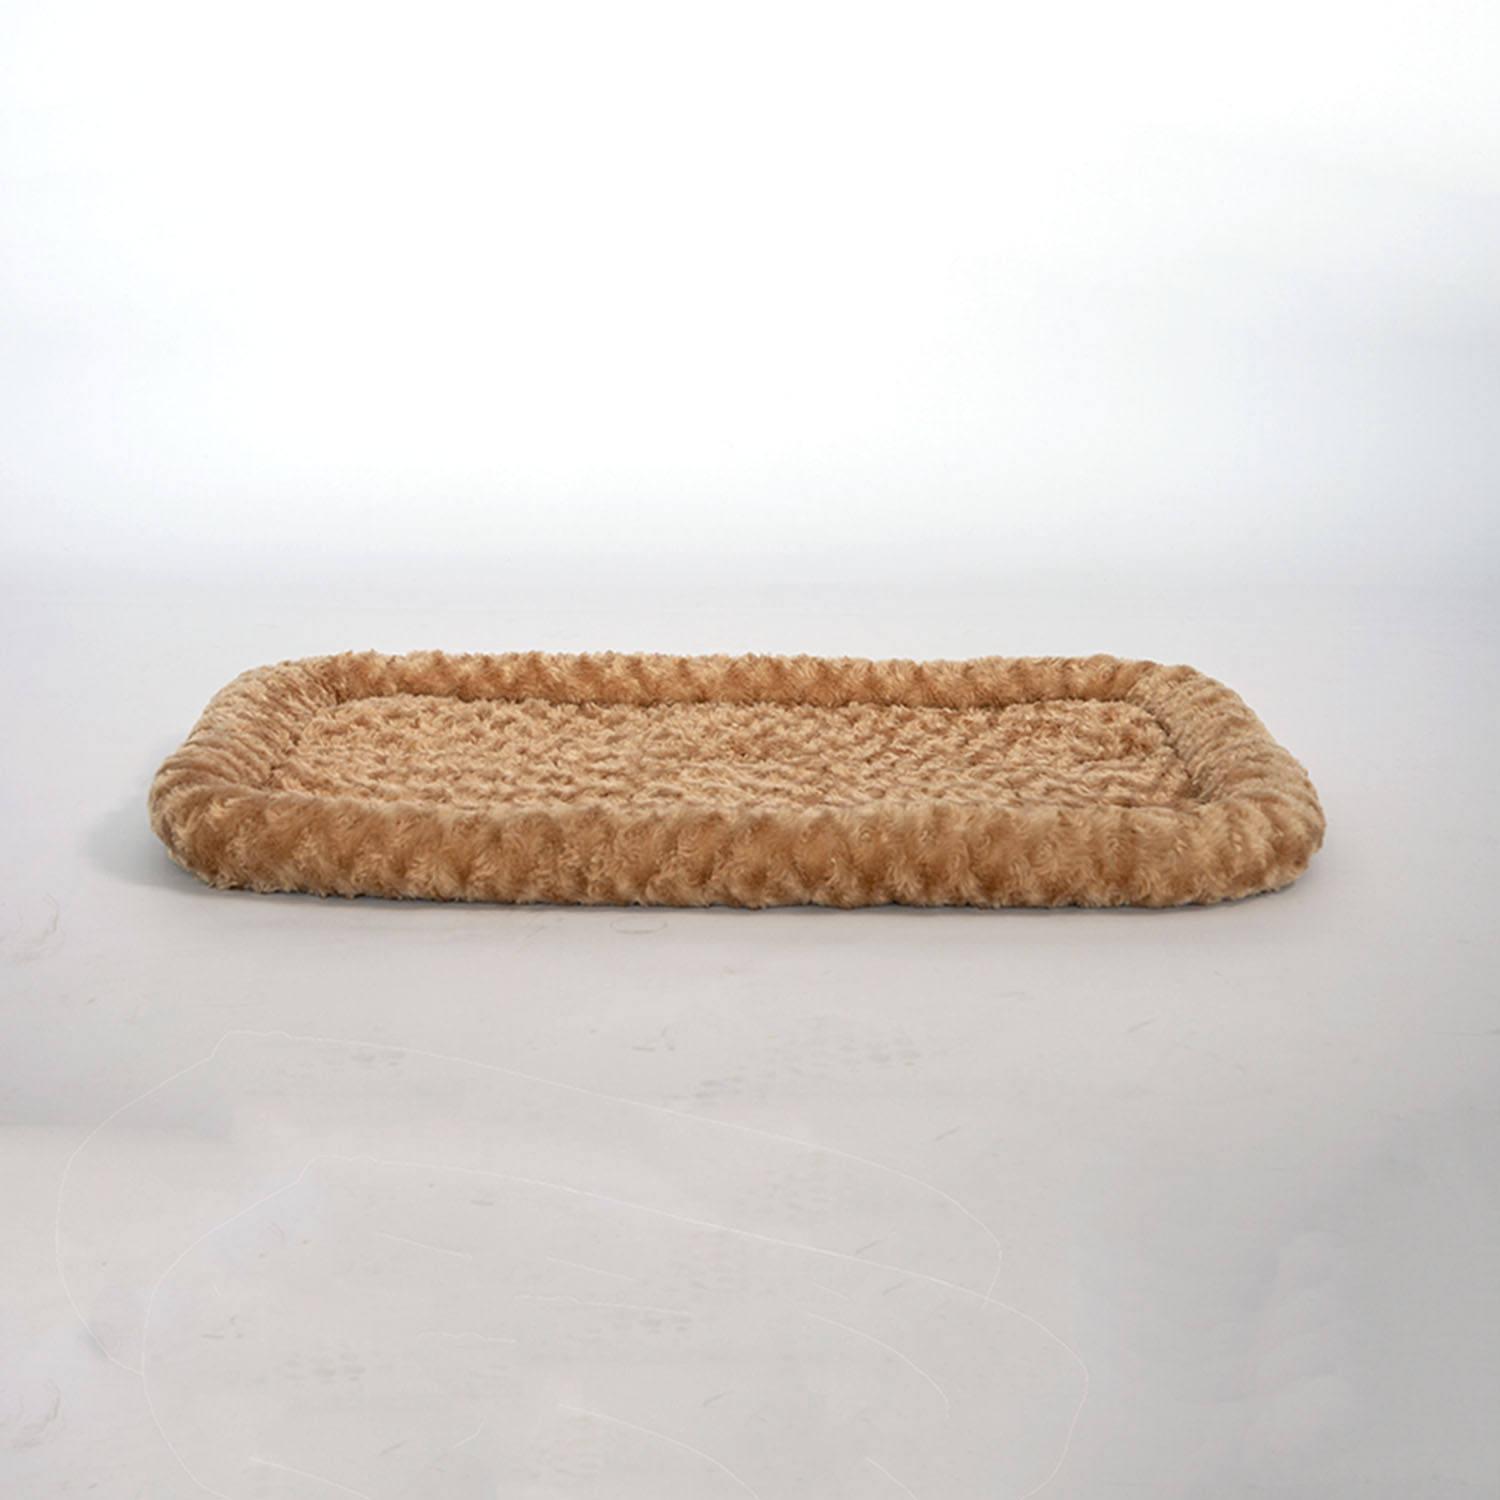 Customisable Dog Bed House,30 Inches,Hidden Litter Box Dog Bedfor Dog Bed